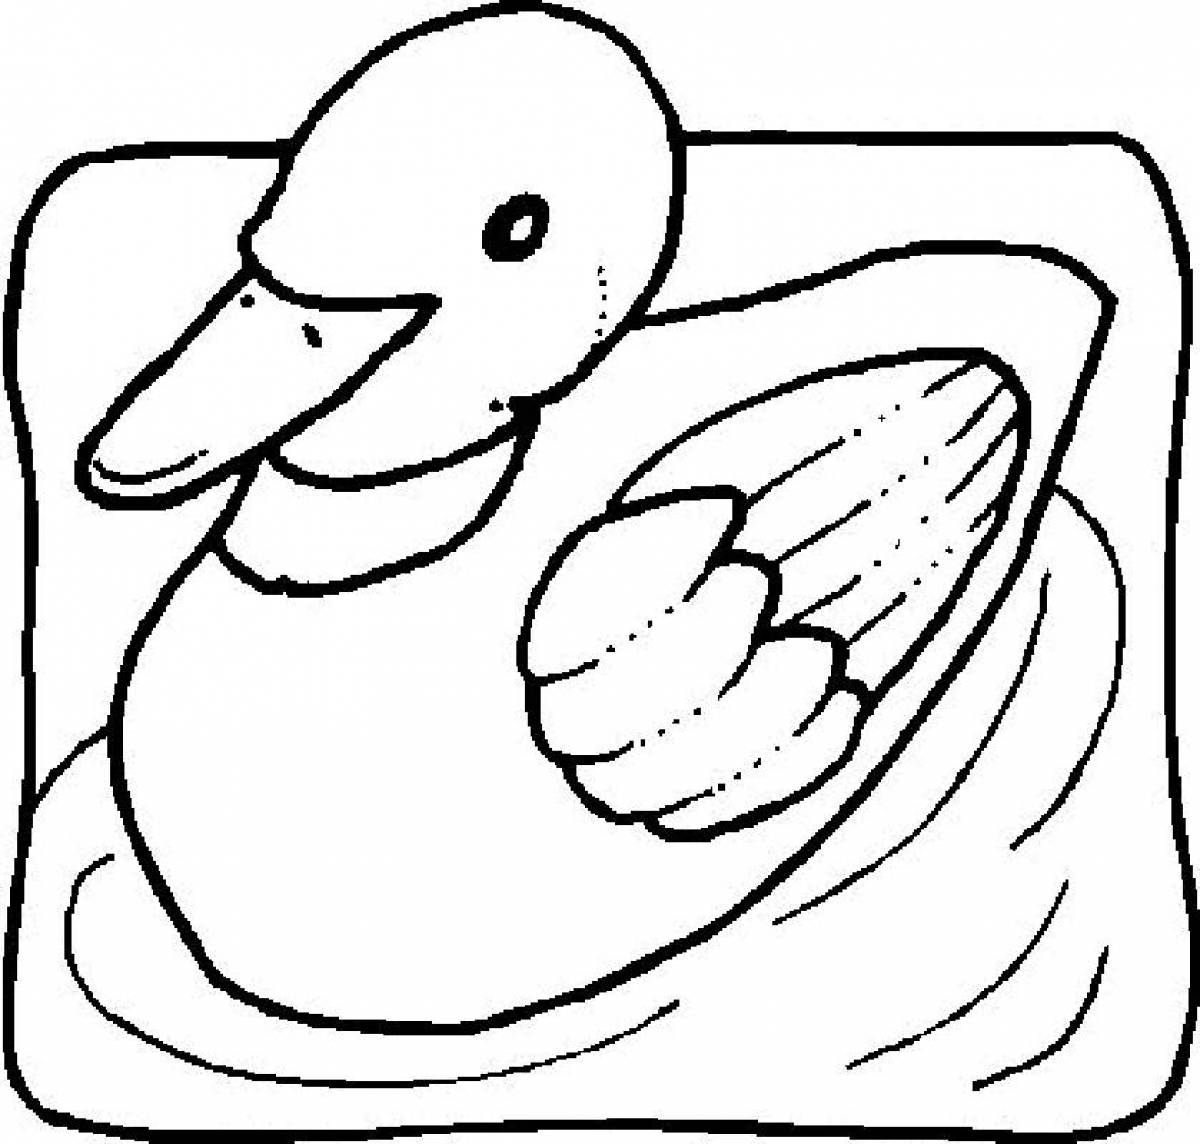 Coloring page adorable lalafanfan duck